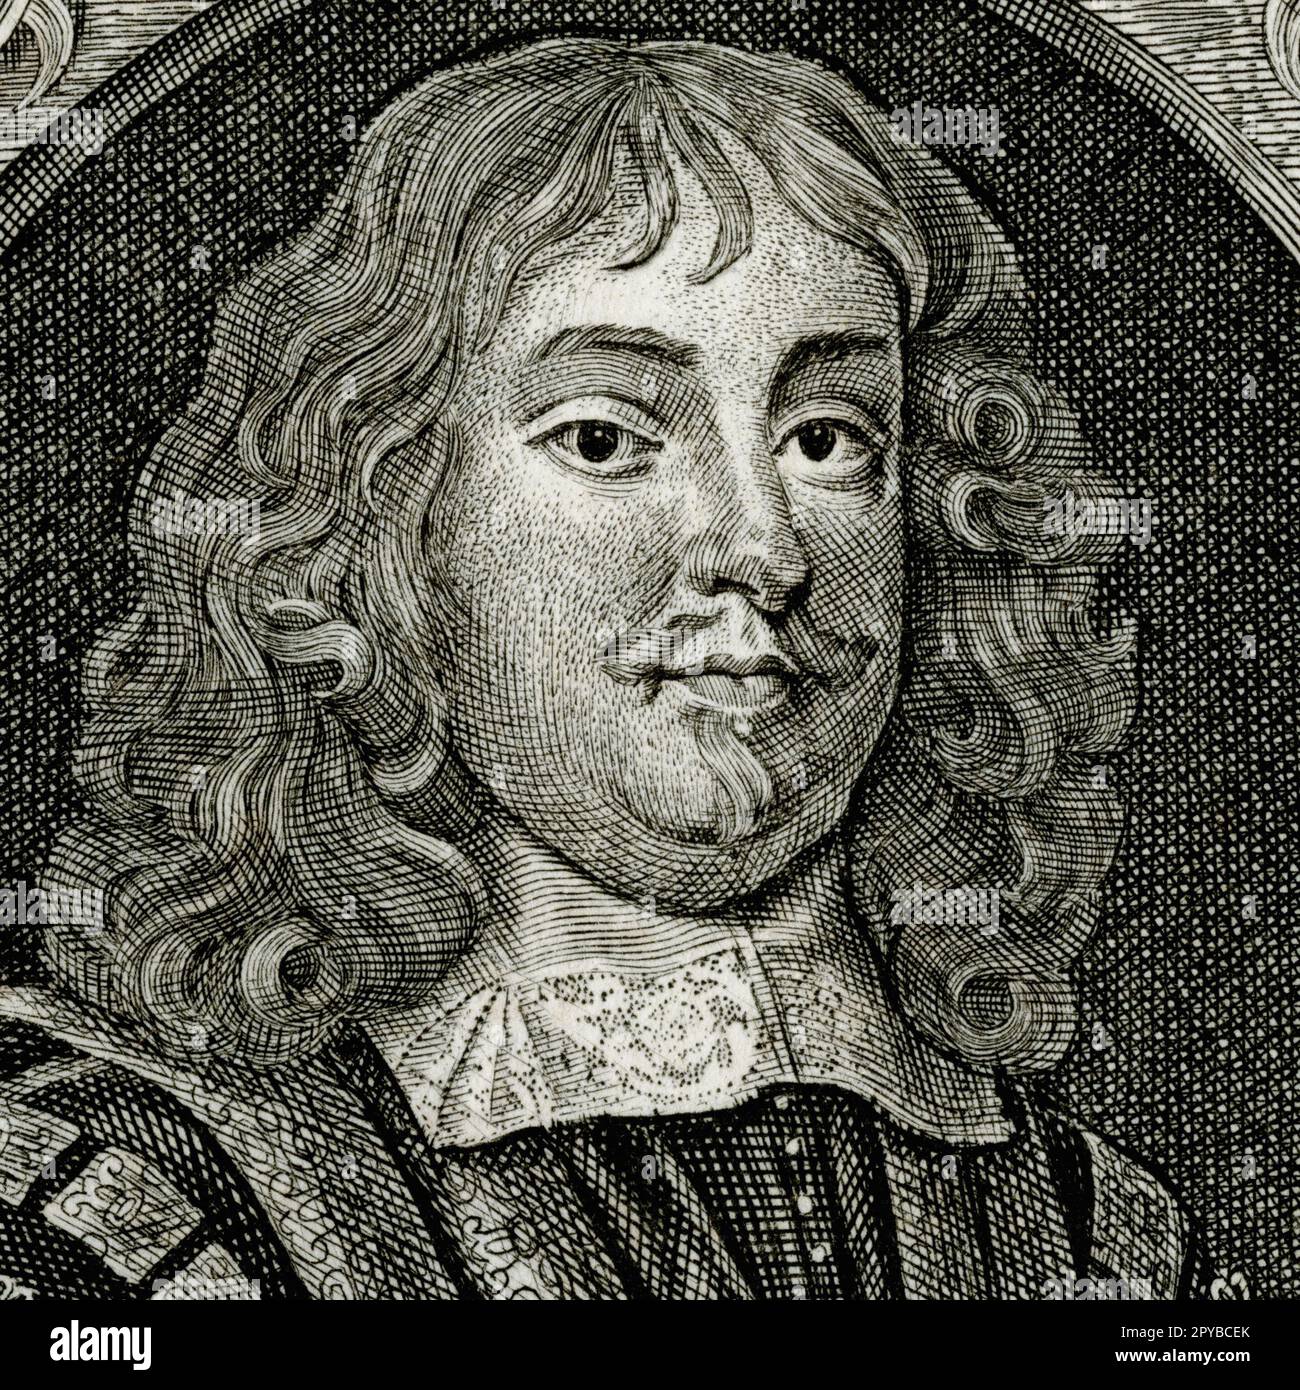 Edward Hyde (1609-1674), 1st Earl of Clarendon, whose ‘History of the Rebellion and Civil Wars in England’ was the first detailed eyewitness account of the period. Square detail of engraving created, after a portrait by Sir Peter Lely (1618-1680), for the 1740 edition of Clarendon's ‘History’.  The full title of Clarendon’s ‘History’ is often shortened to ‘Clarendon’s Rebellion’. Stock Photo